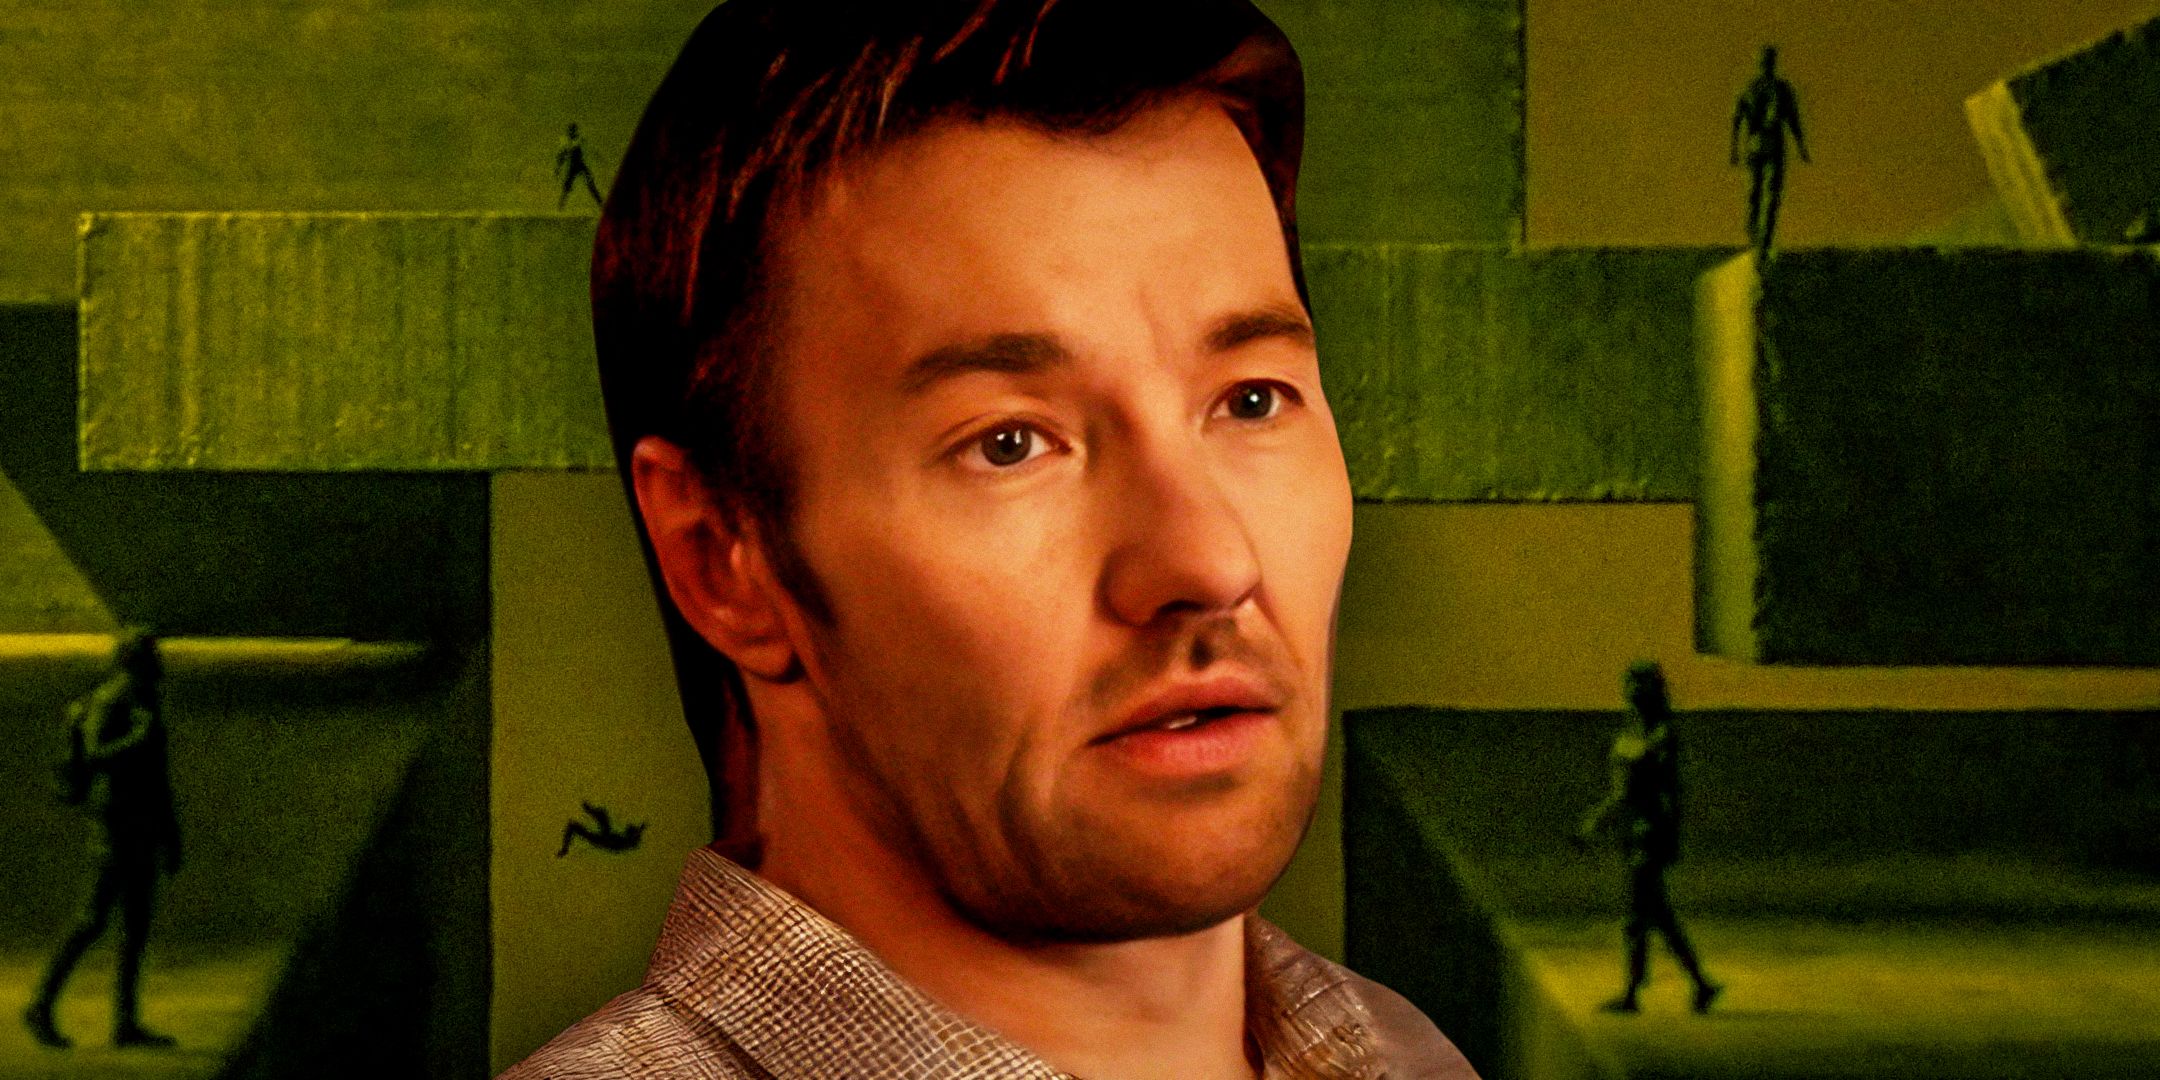 Joel Edgerton as Jason Dessen in Dark Matter with the imagery from the theme song as the background